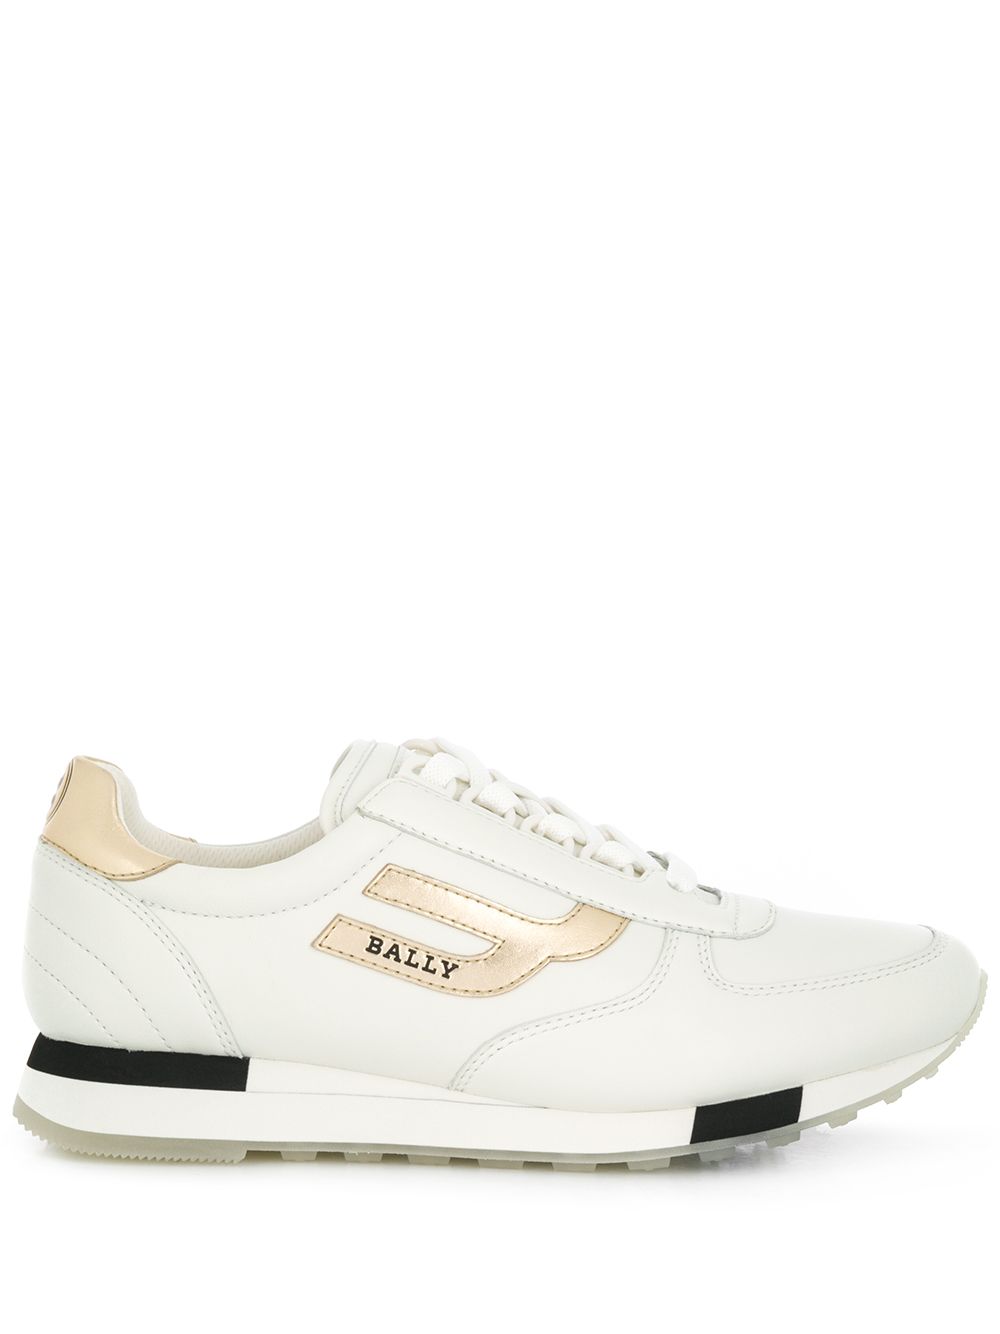 BALLY METALLIC-TRIM LACE-UP SNEAKERS